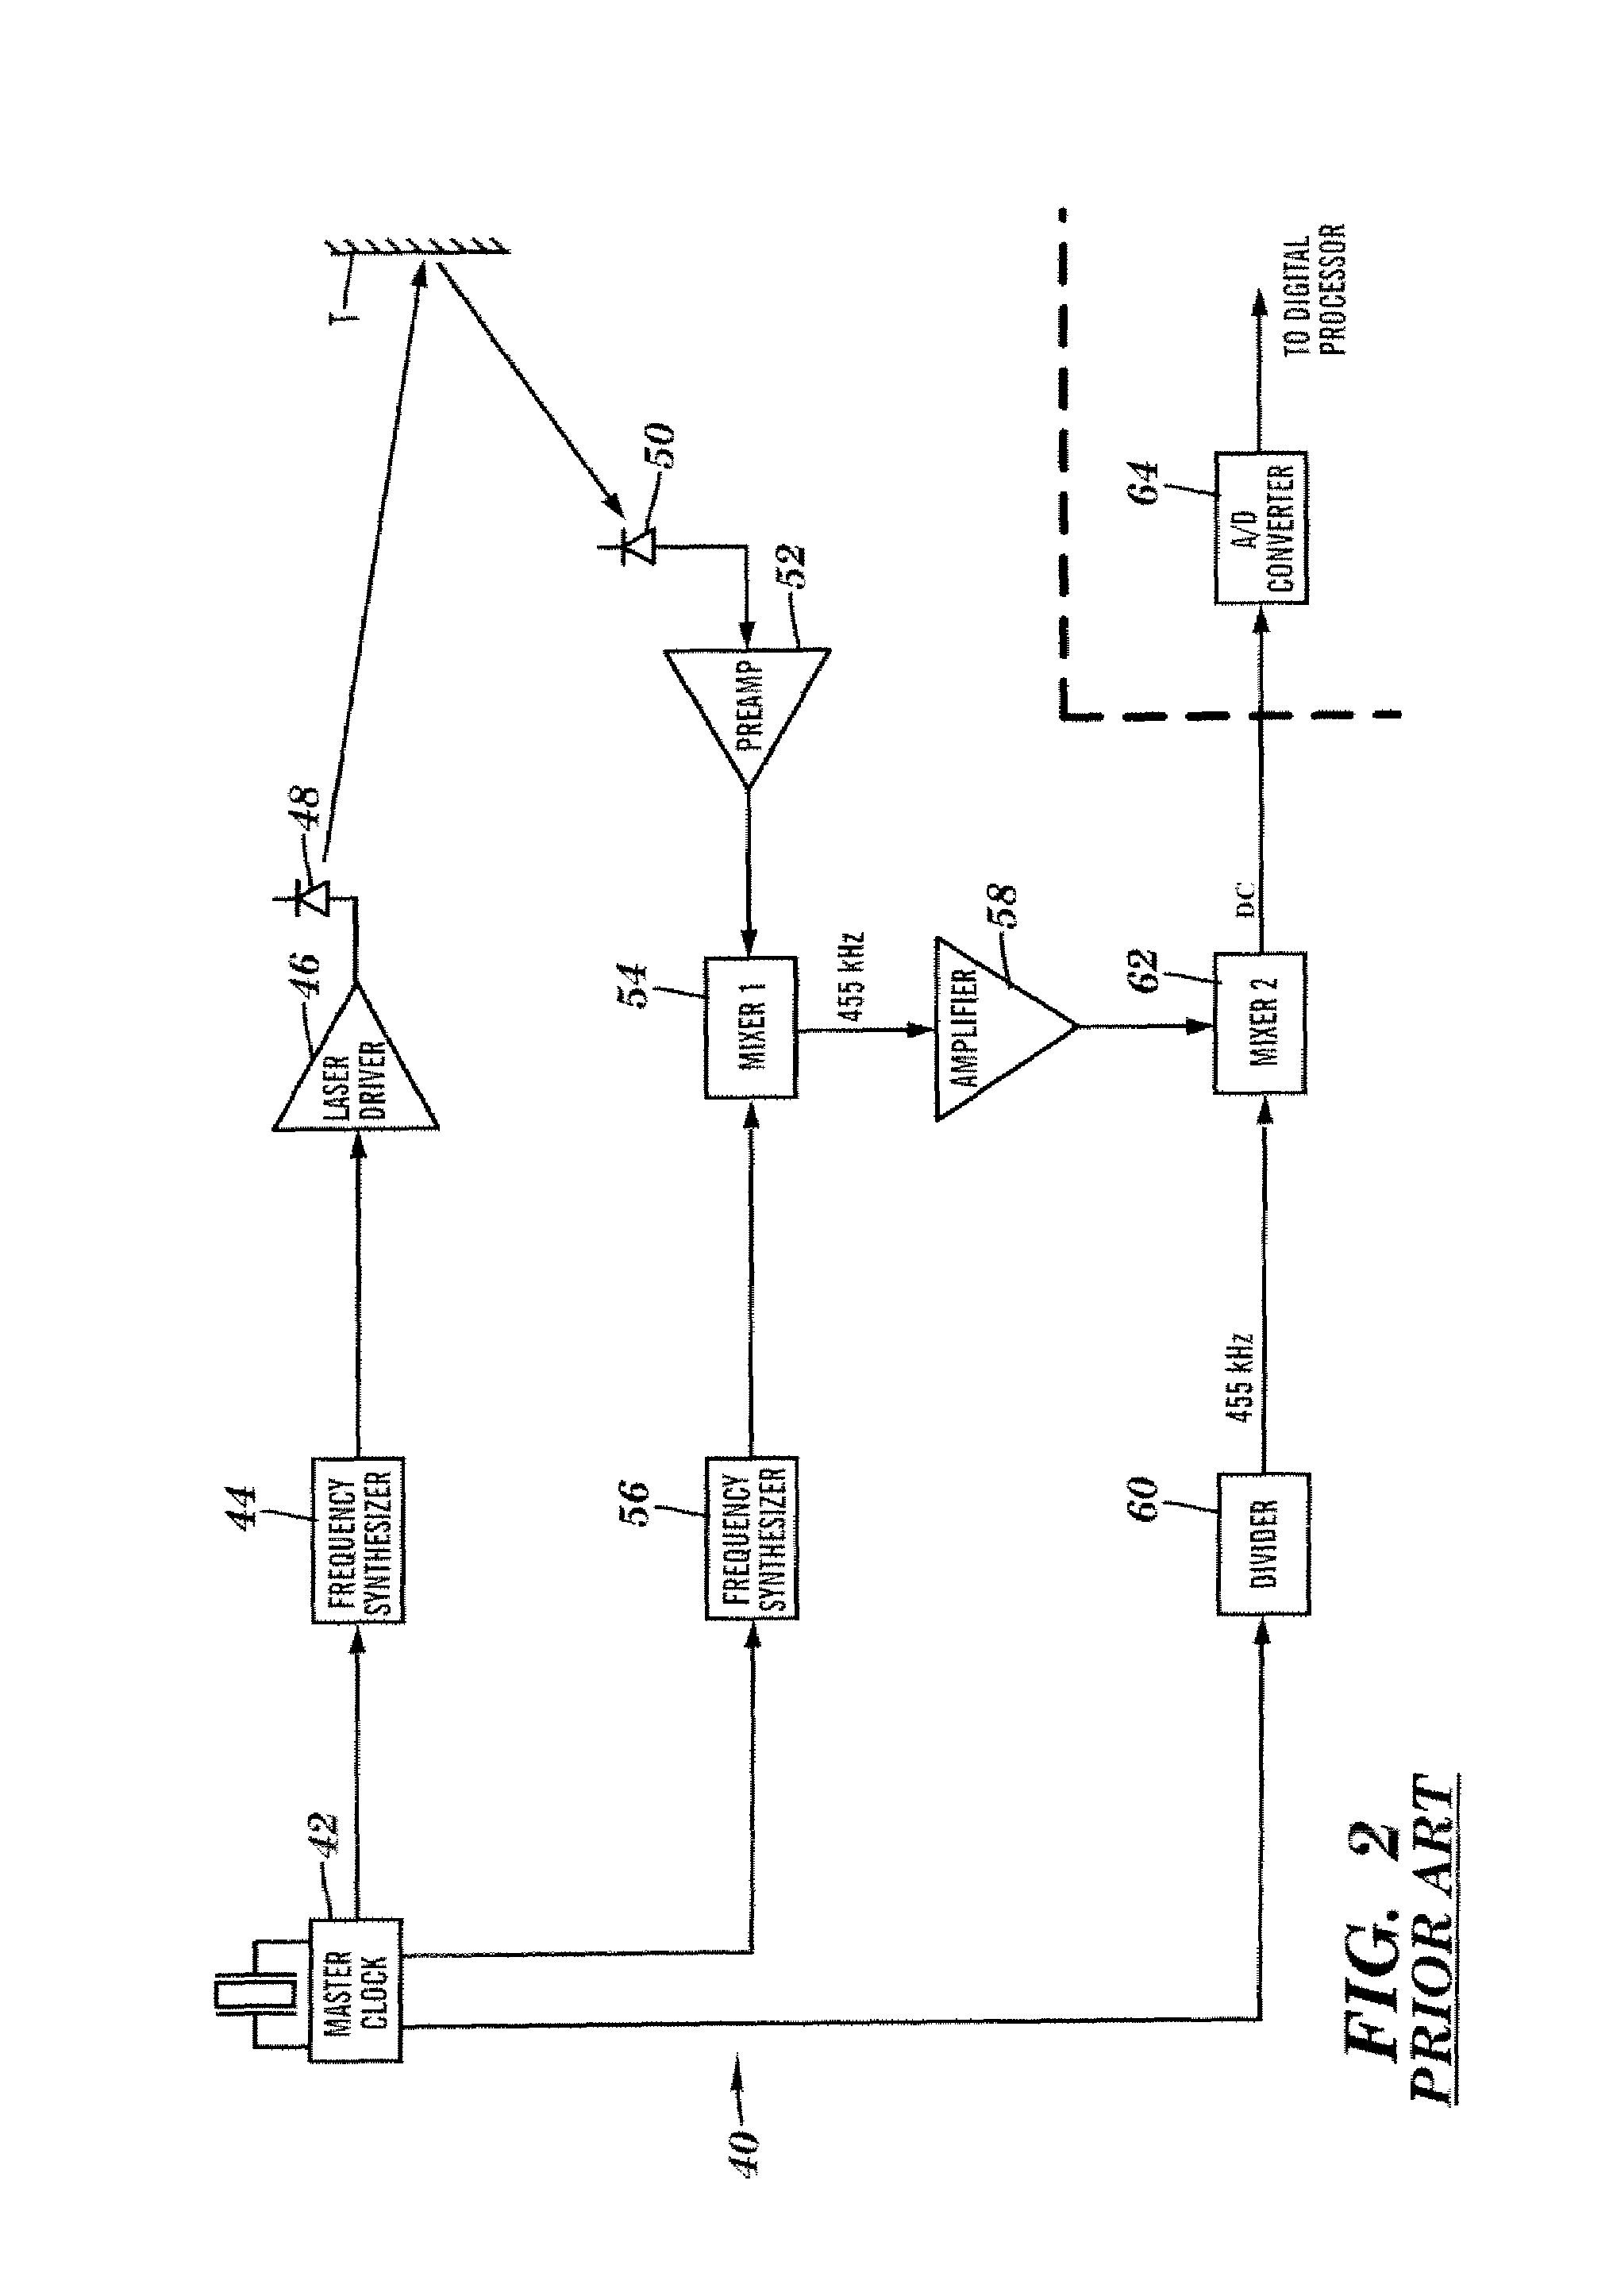 Apparatus for high accuracy distance and velocity measurement and methods thereof